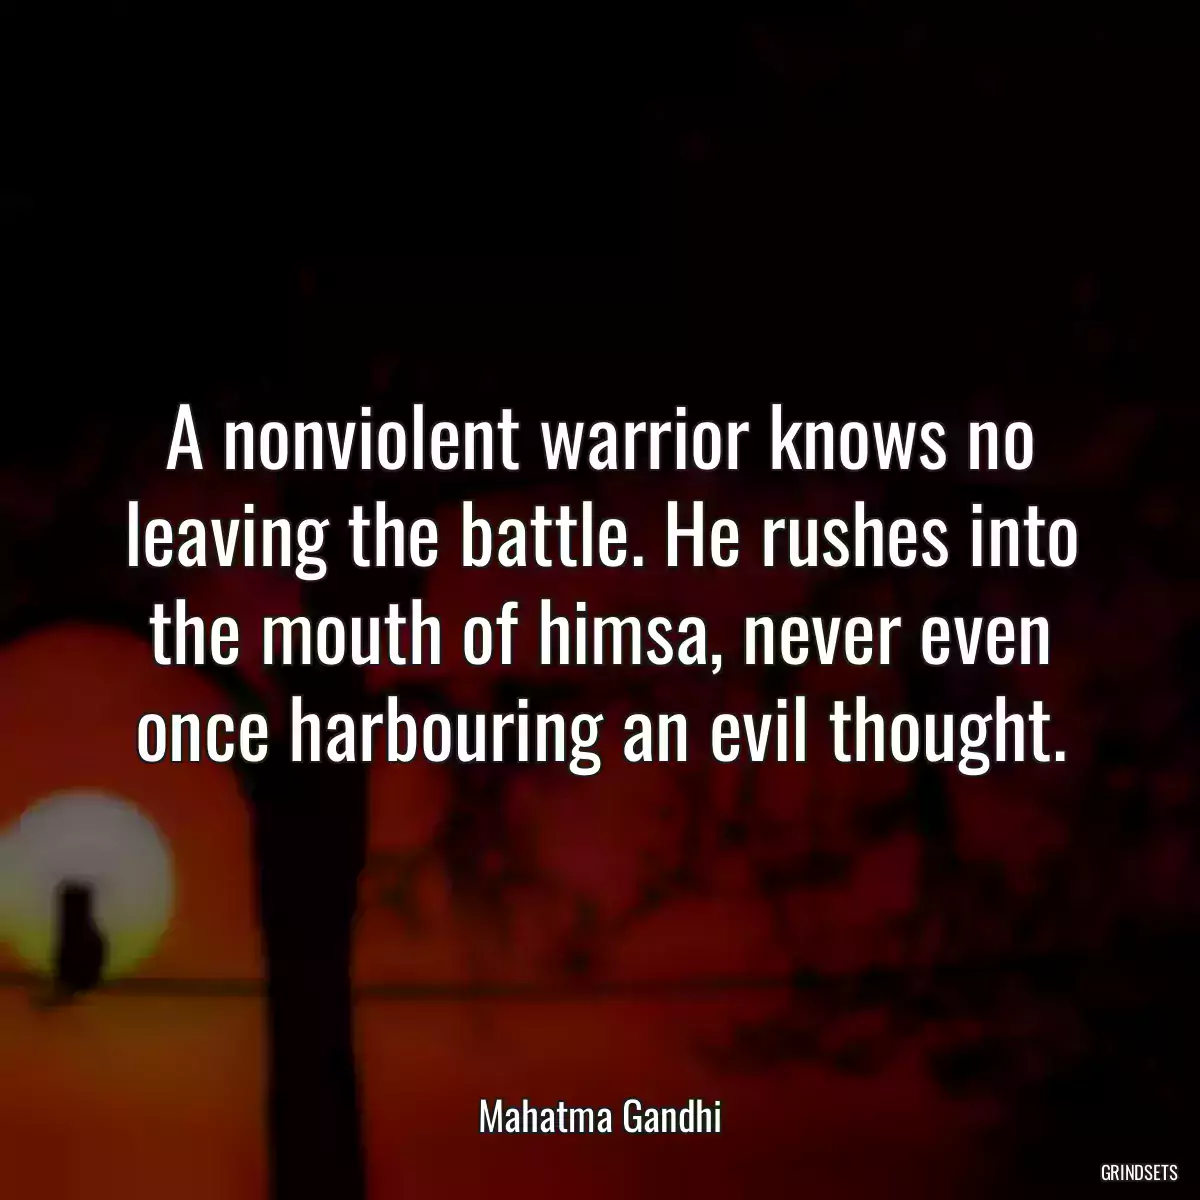 A nonviolent warrior knows no leaving the battle. He rushes into the mouth of himsa, never even once harbouring an evil thought.